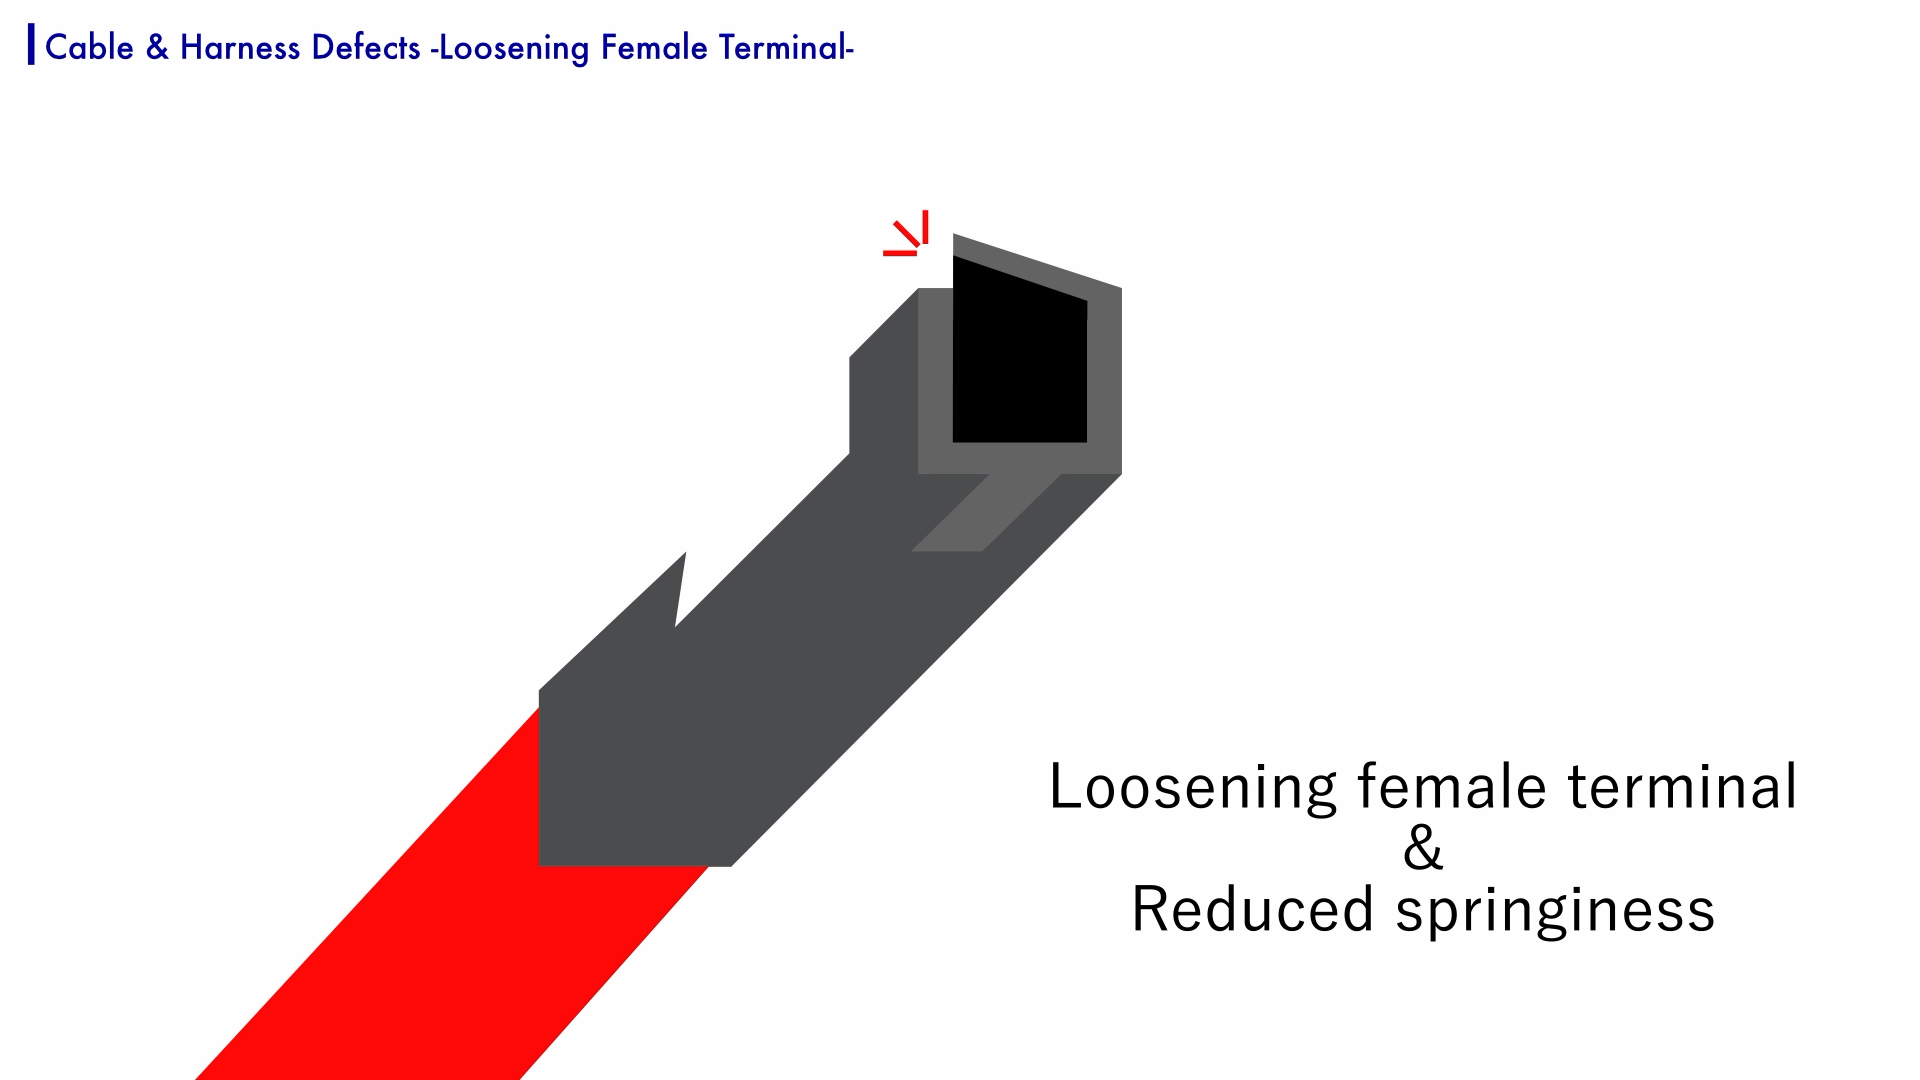 Loosening female terminal and reduced springiness